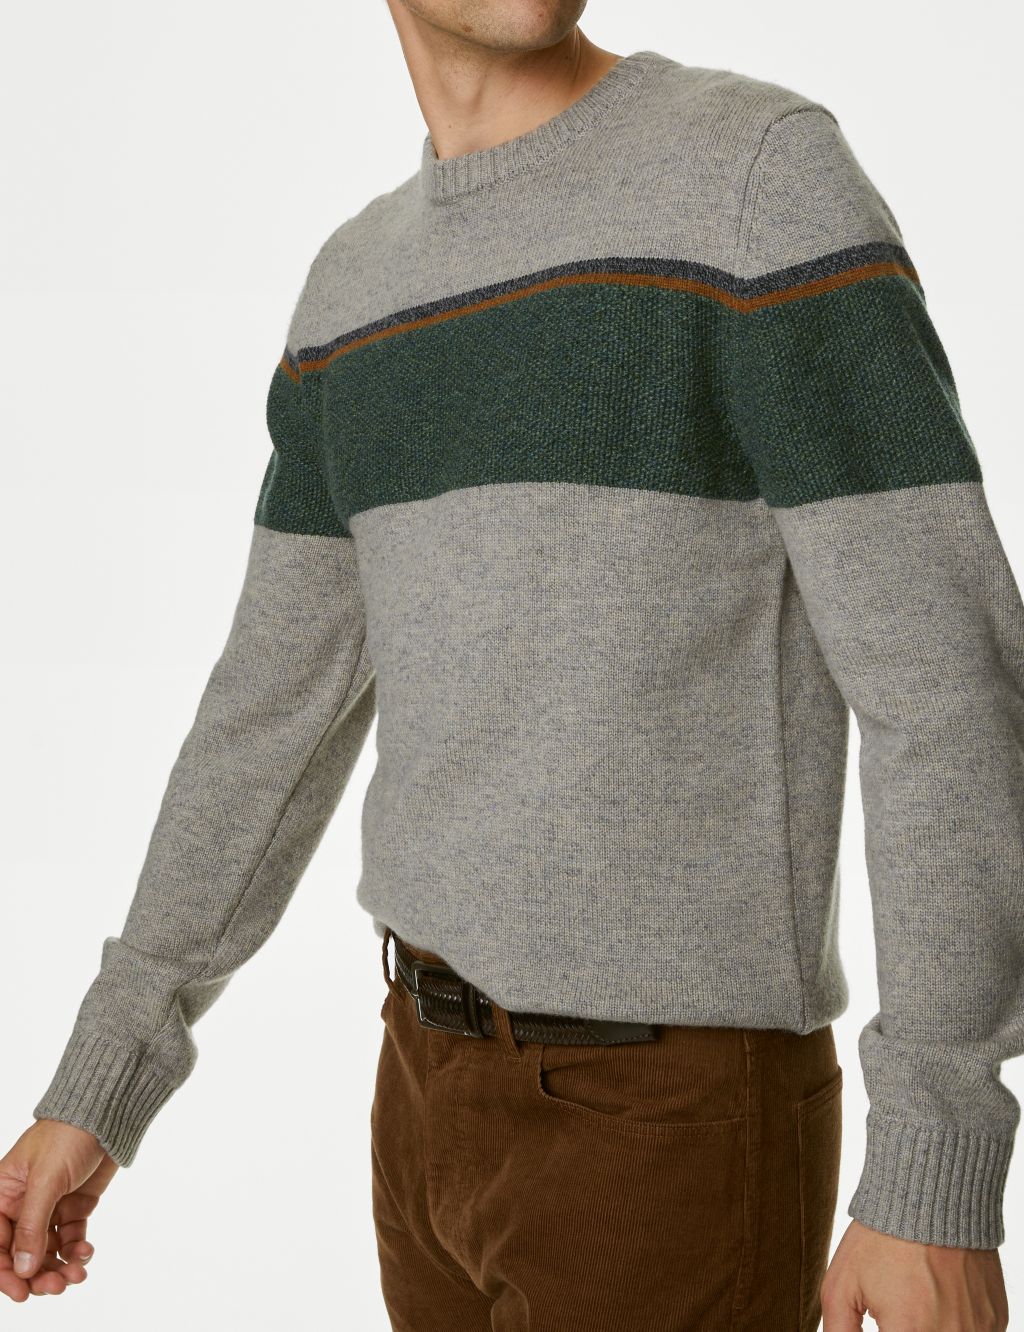 Lambswool Blend Striped Crew Neck Jumper image 4